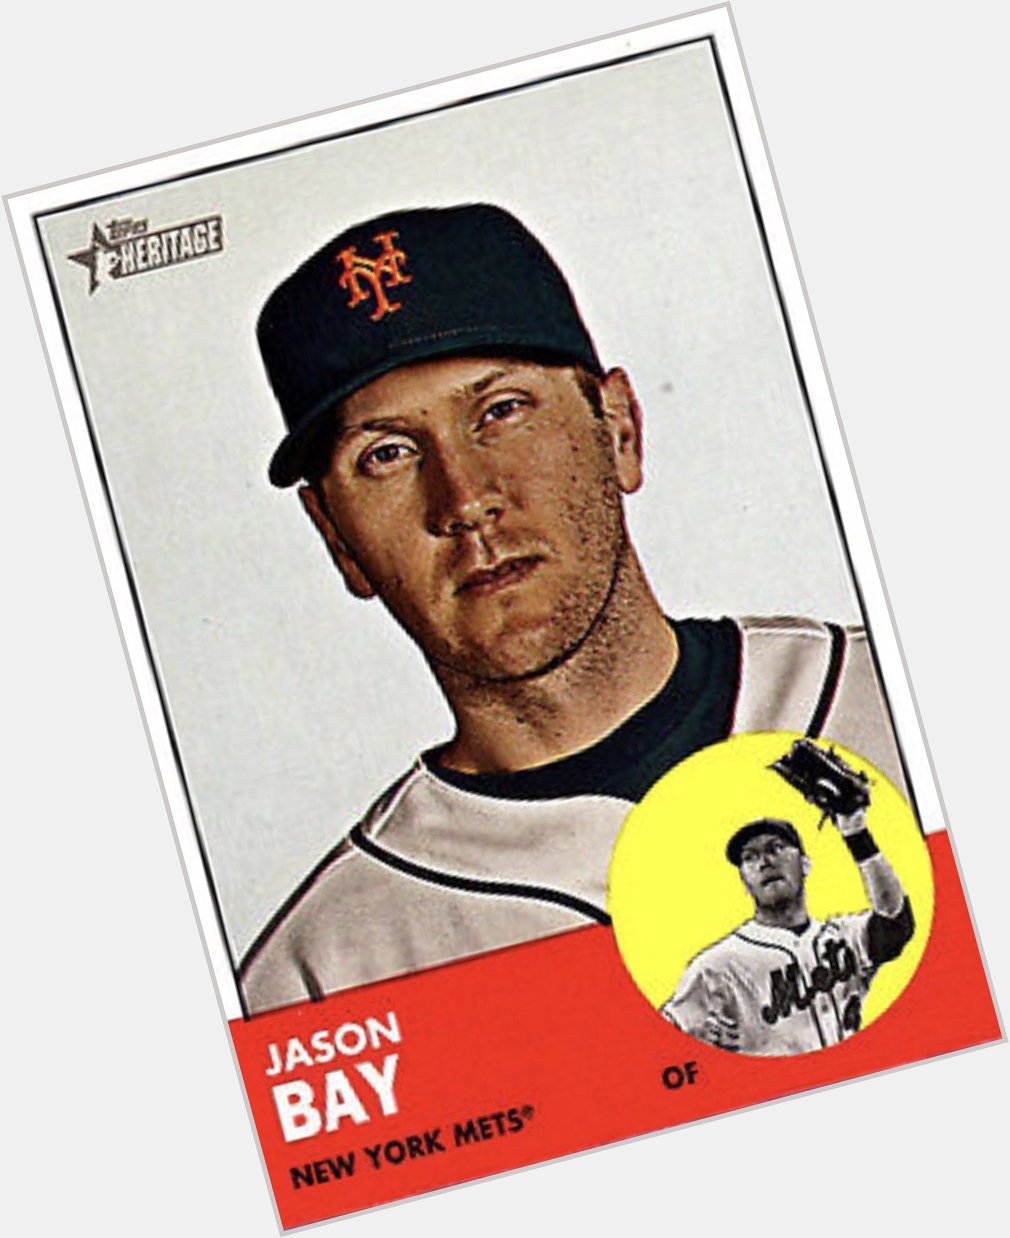 Happy 39th Birthday to Jason Bay, who was 3-for-10, 4 BB, 2 R, SB, in 3 games with the 2012 